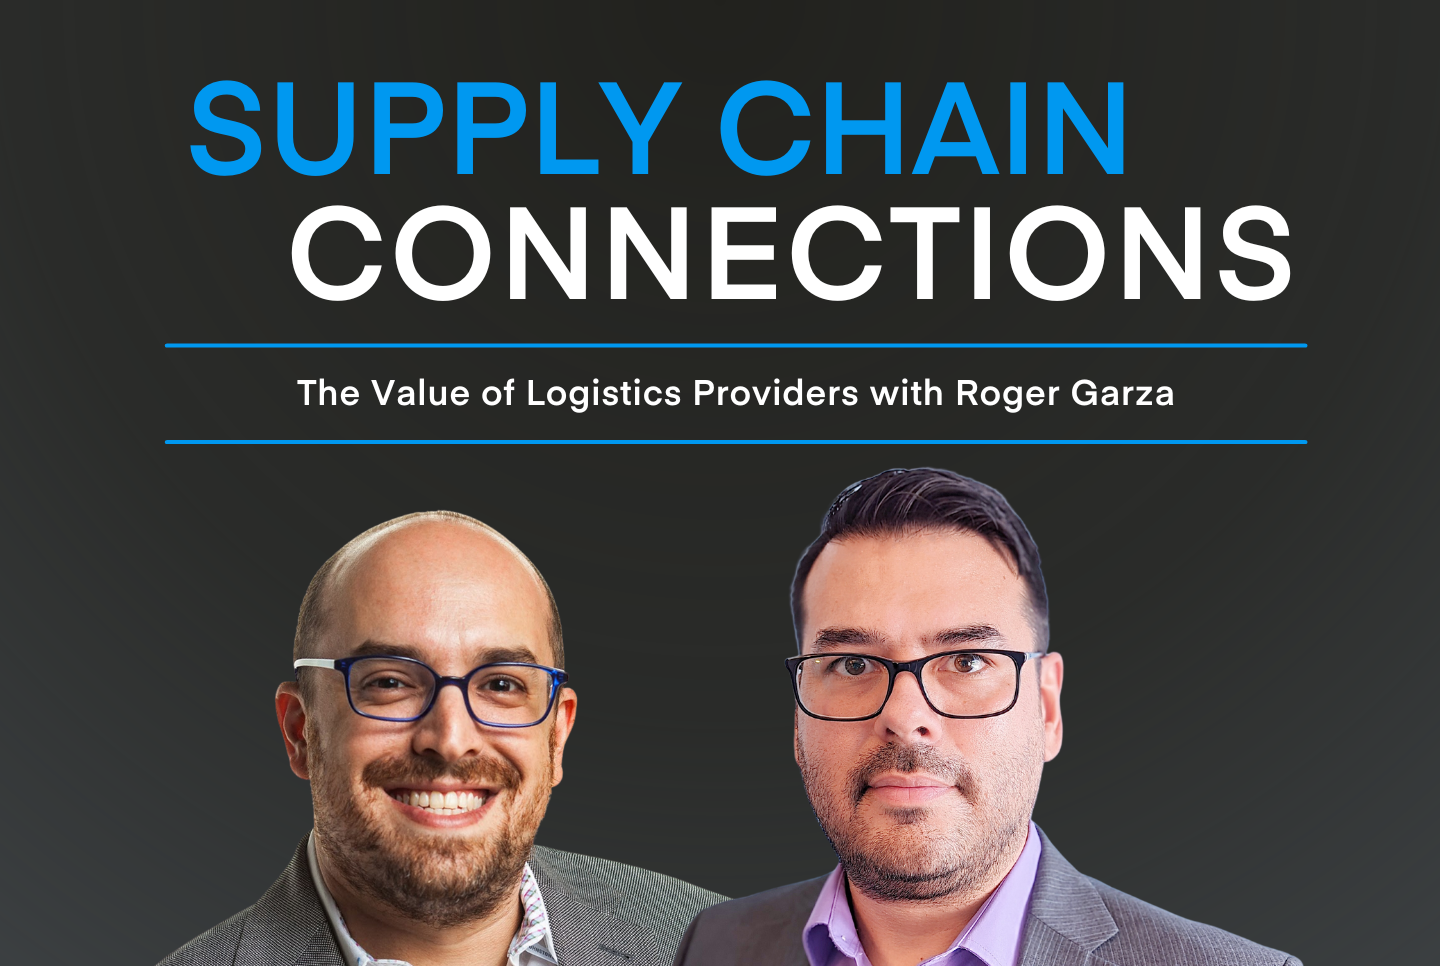 In this episode, Roger Garza, Director of Global Product Management at xpd global, joins Host Brian Glick, CEO of Chain.io, to discuss